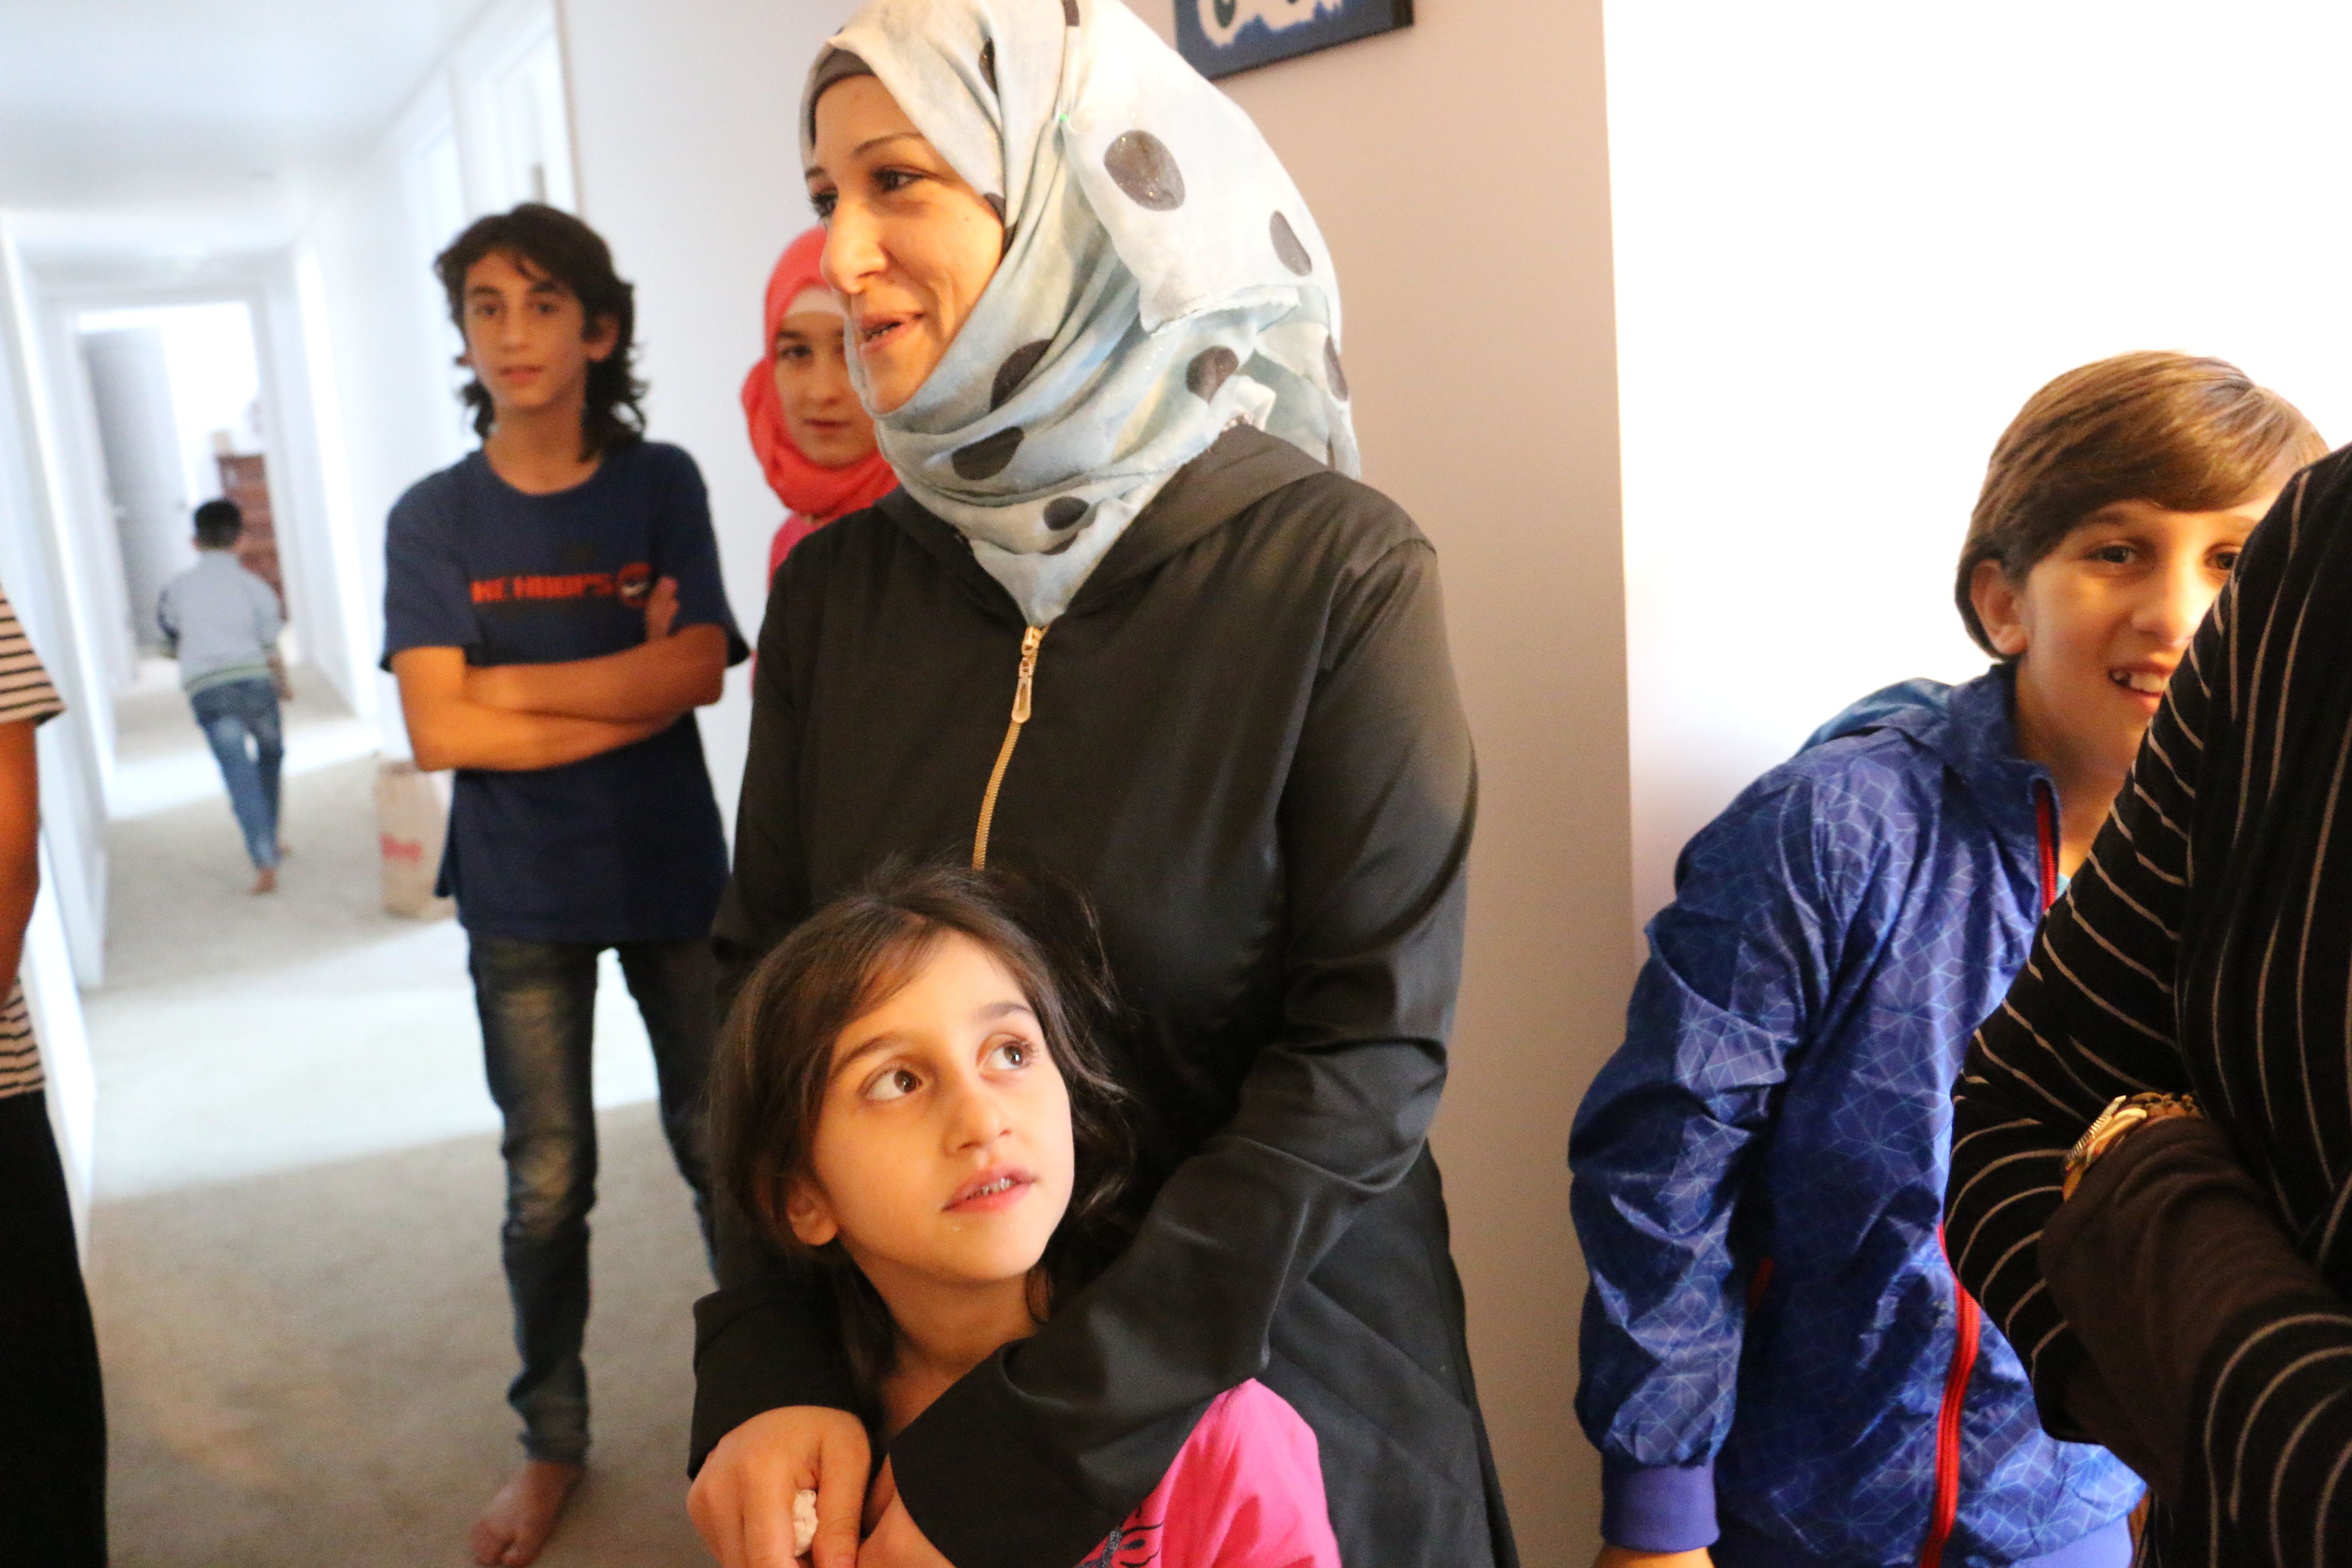 Ghazweh and her family of seven are thrilled to quickly move into a new home